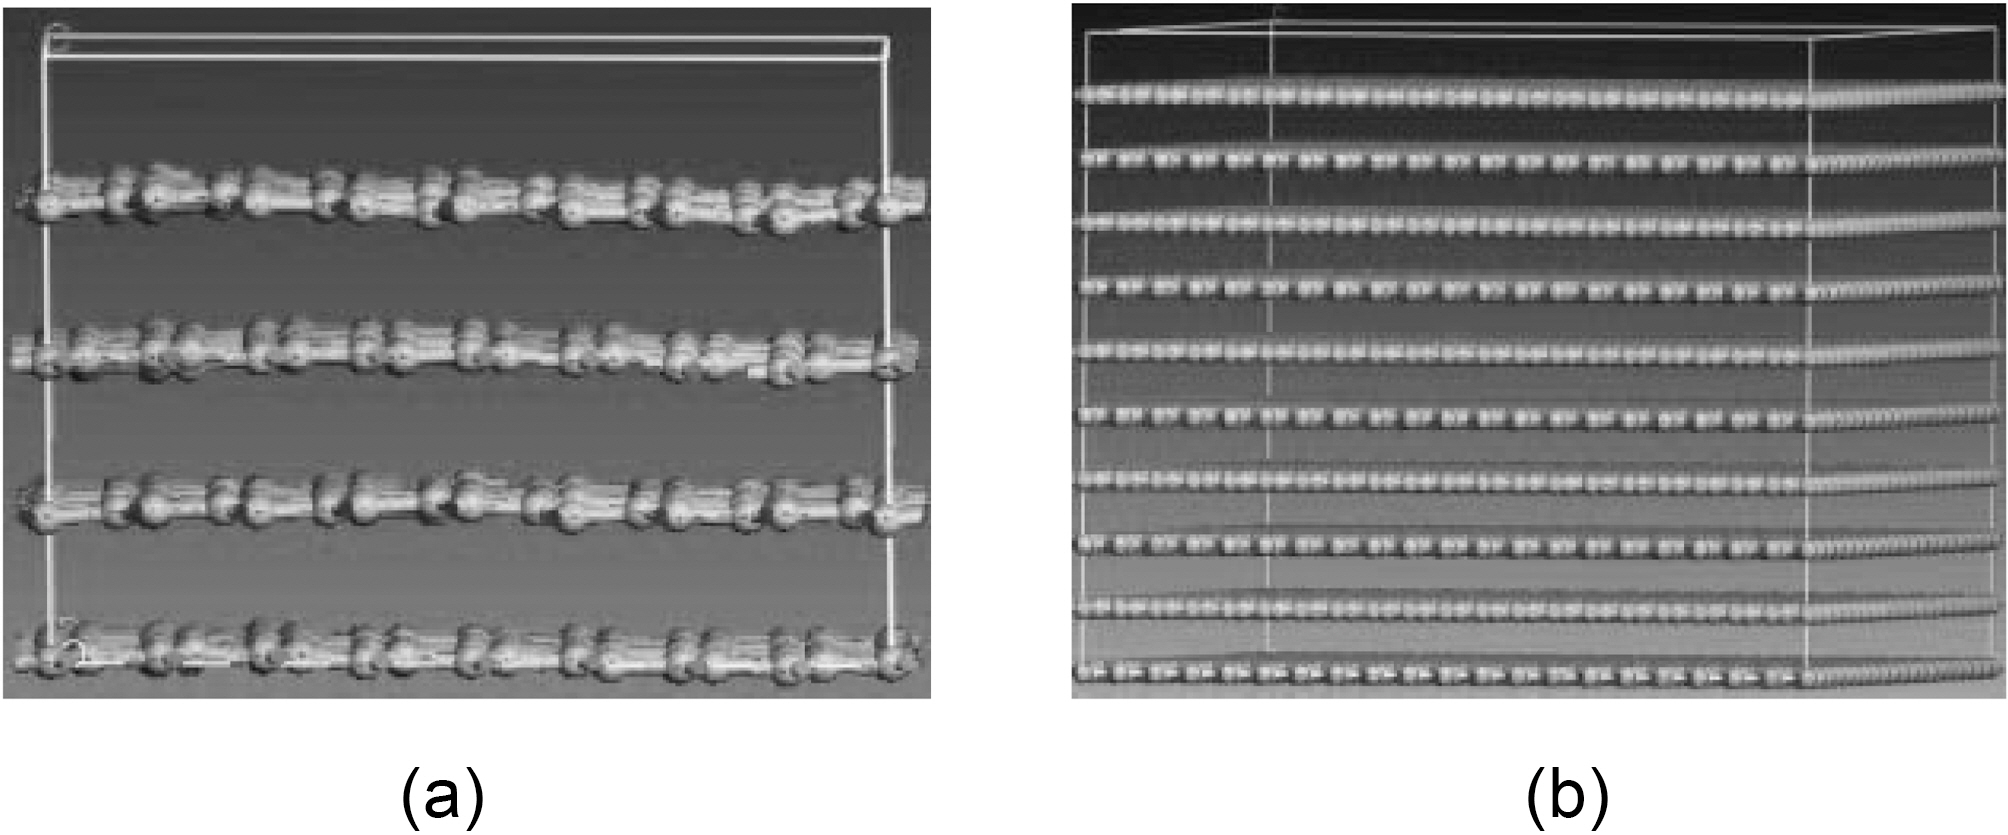 Multi layered graphite super cell: (a) four layers and (b) ten layers.